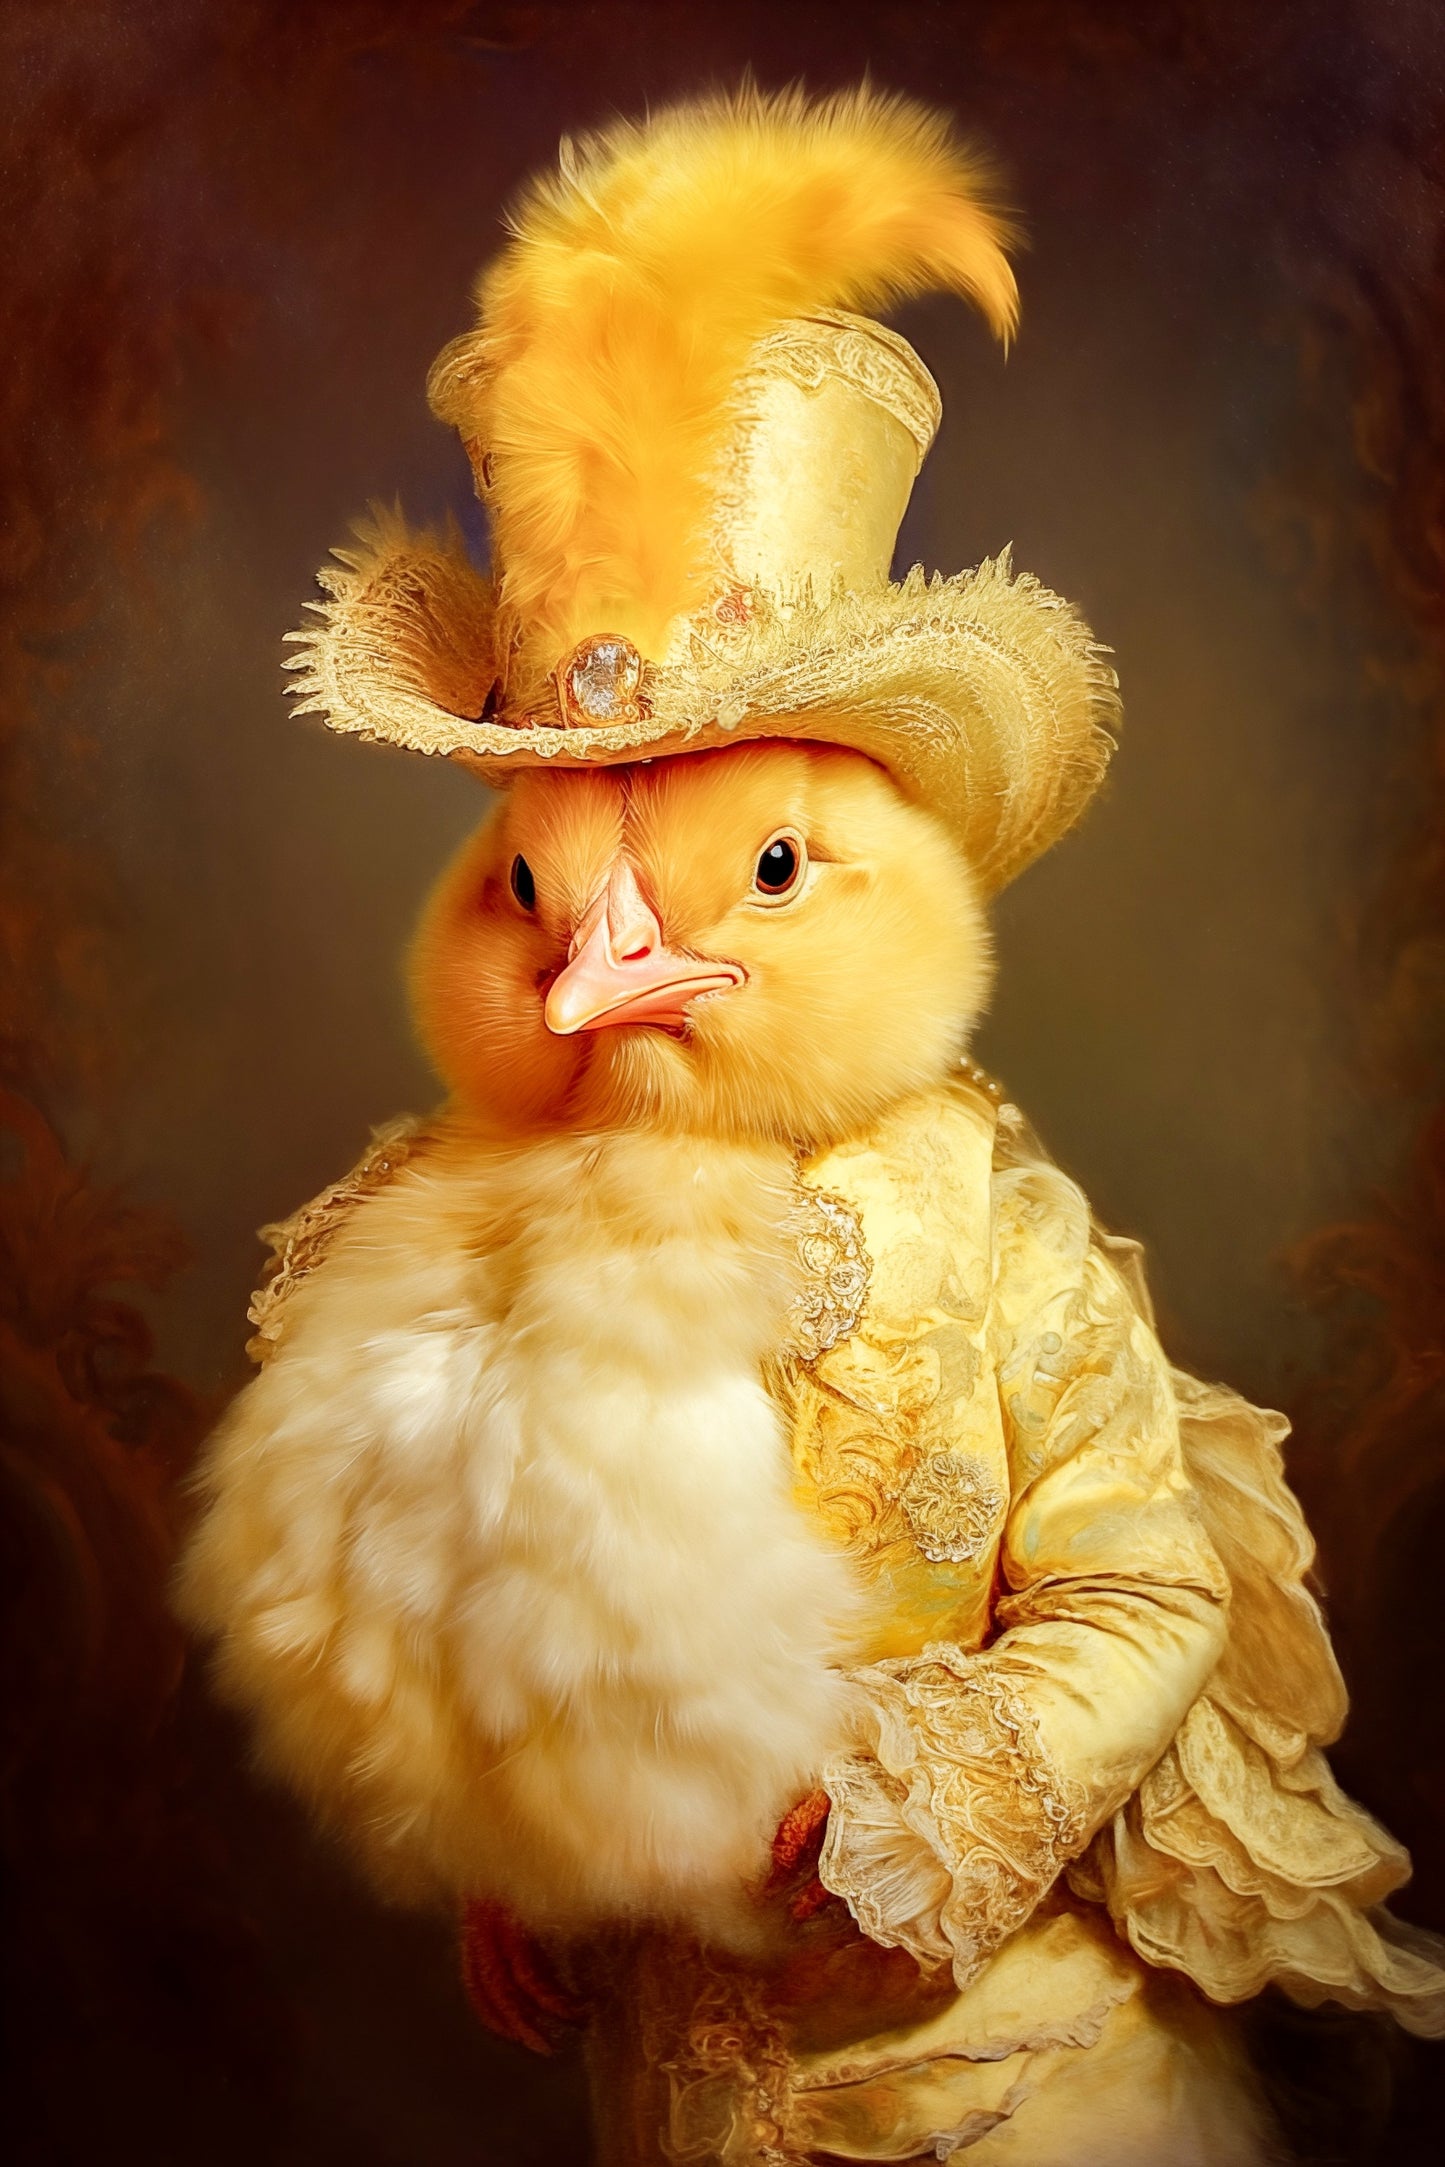 Victorian Wedding Party Portrait Series | Chicken in Formal Attire Portrait on Watercolor Paper from The Curated Goose